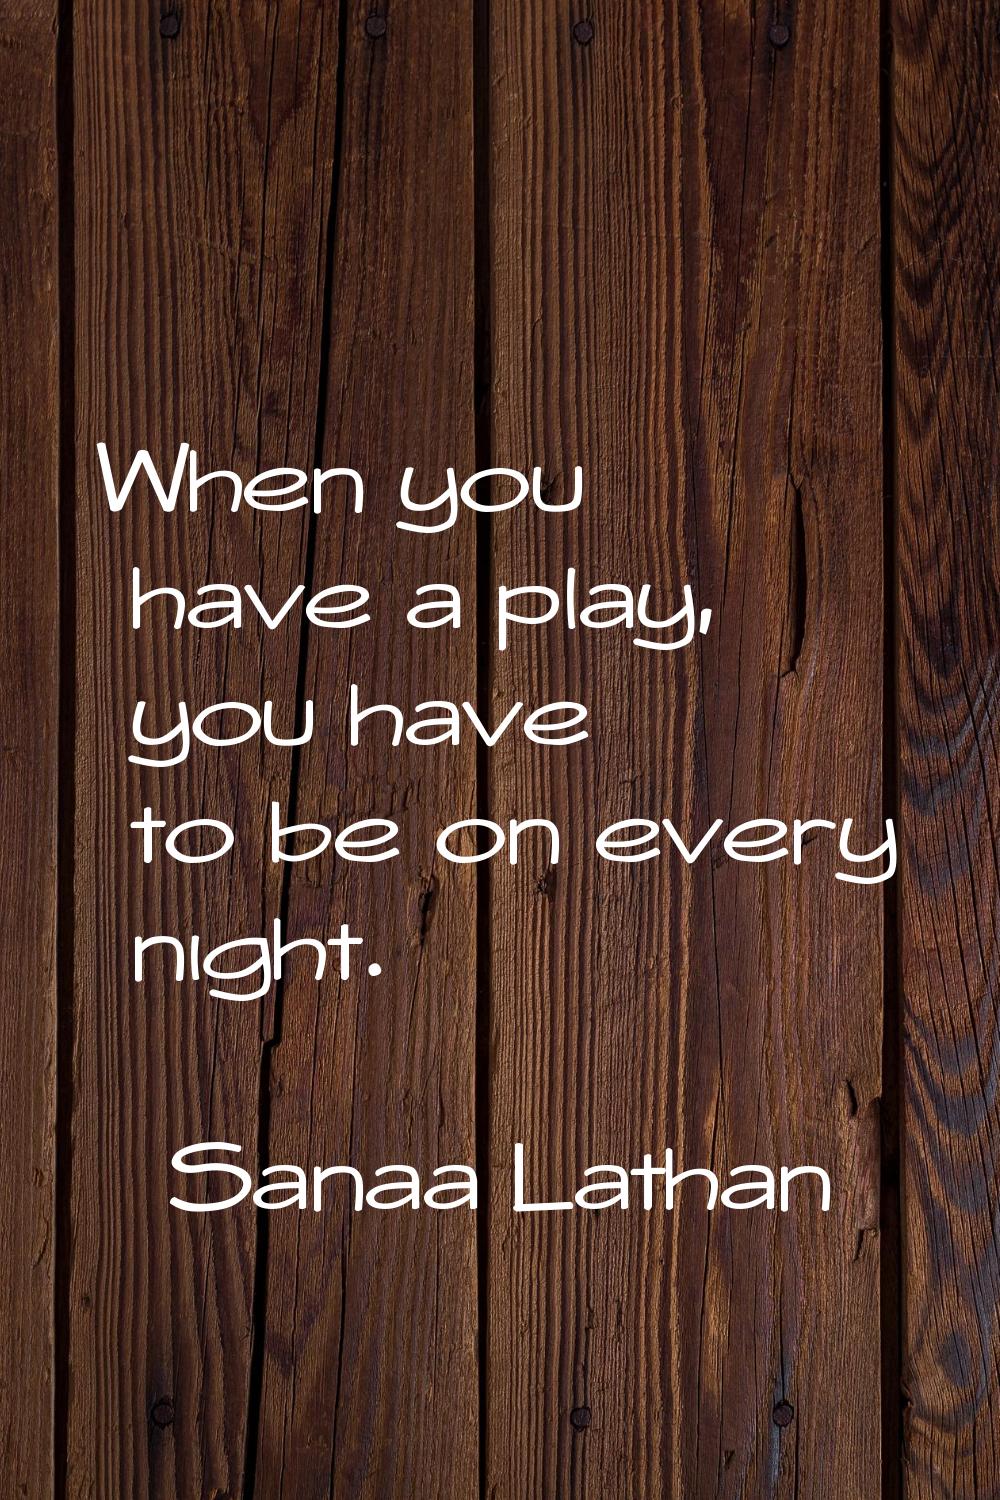 When you have a play, you have to be on every night.